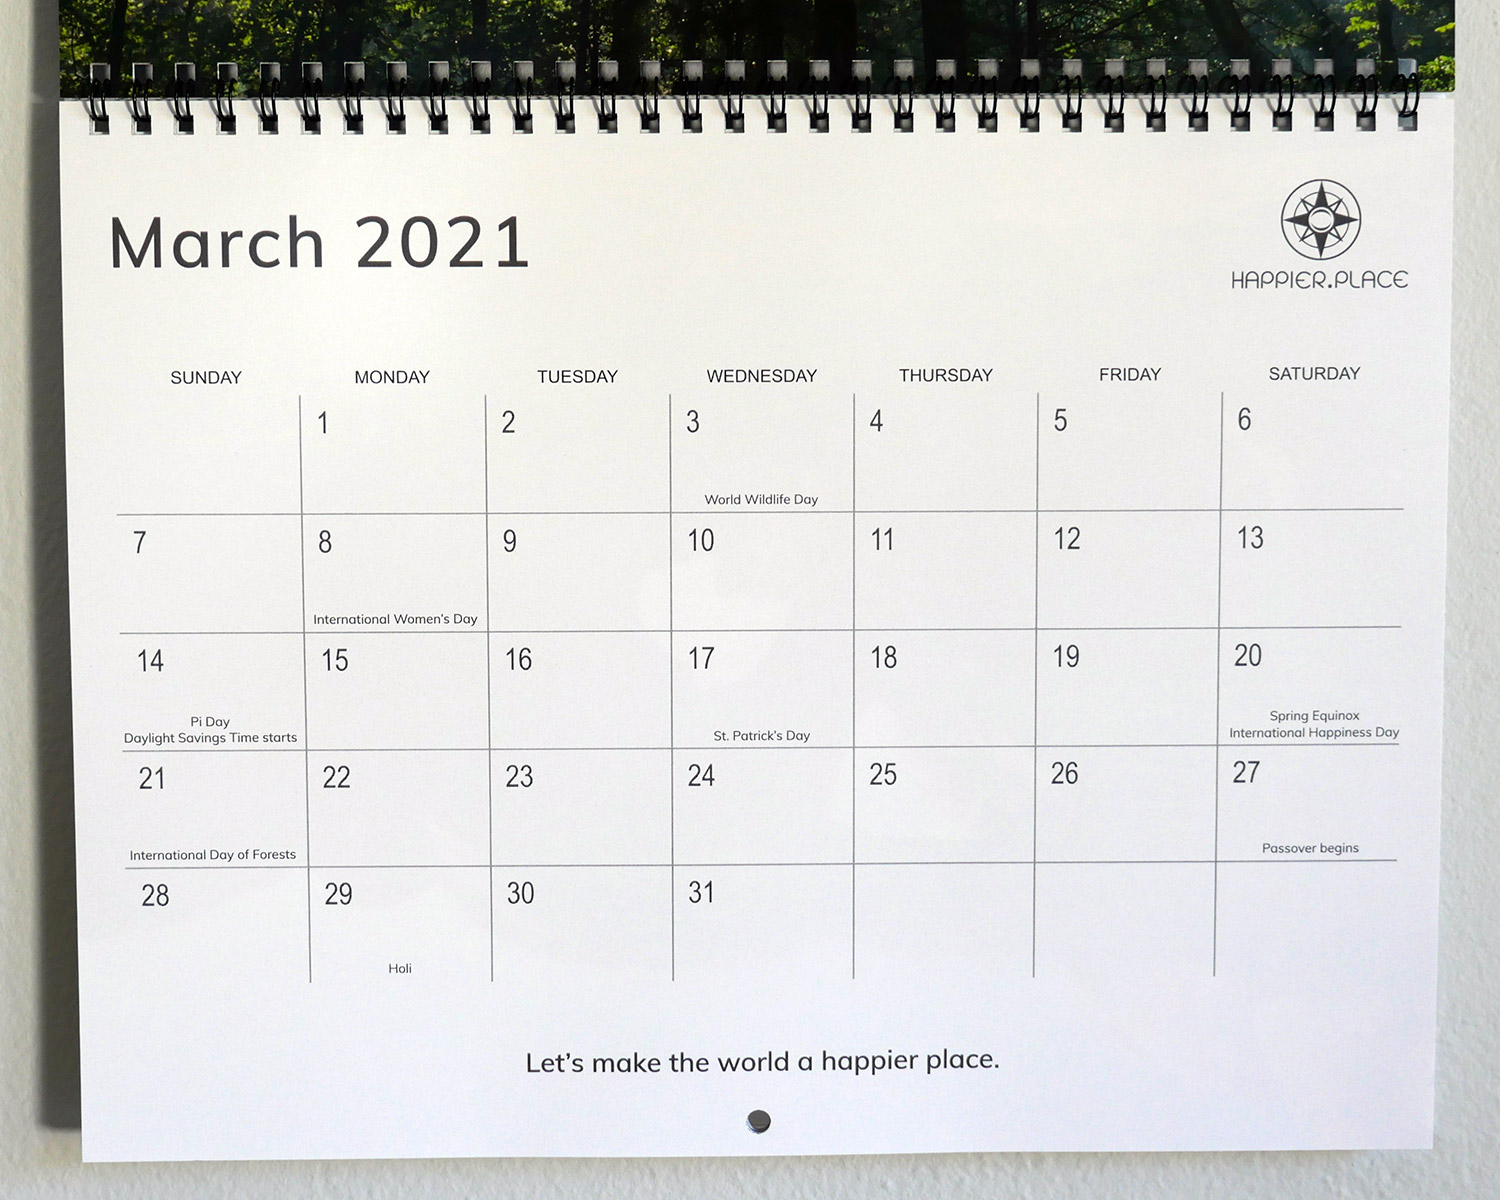 March 2021 calendar page, Happier Place nature calendar, let's make the world a happier place, holidays, wildlife day, forest day